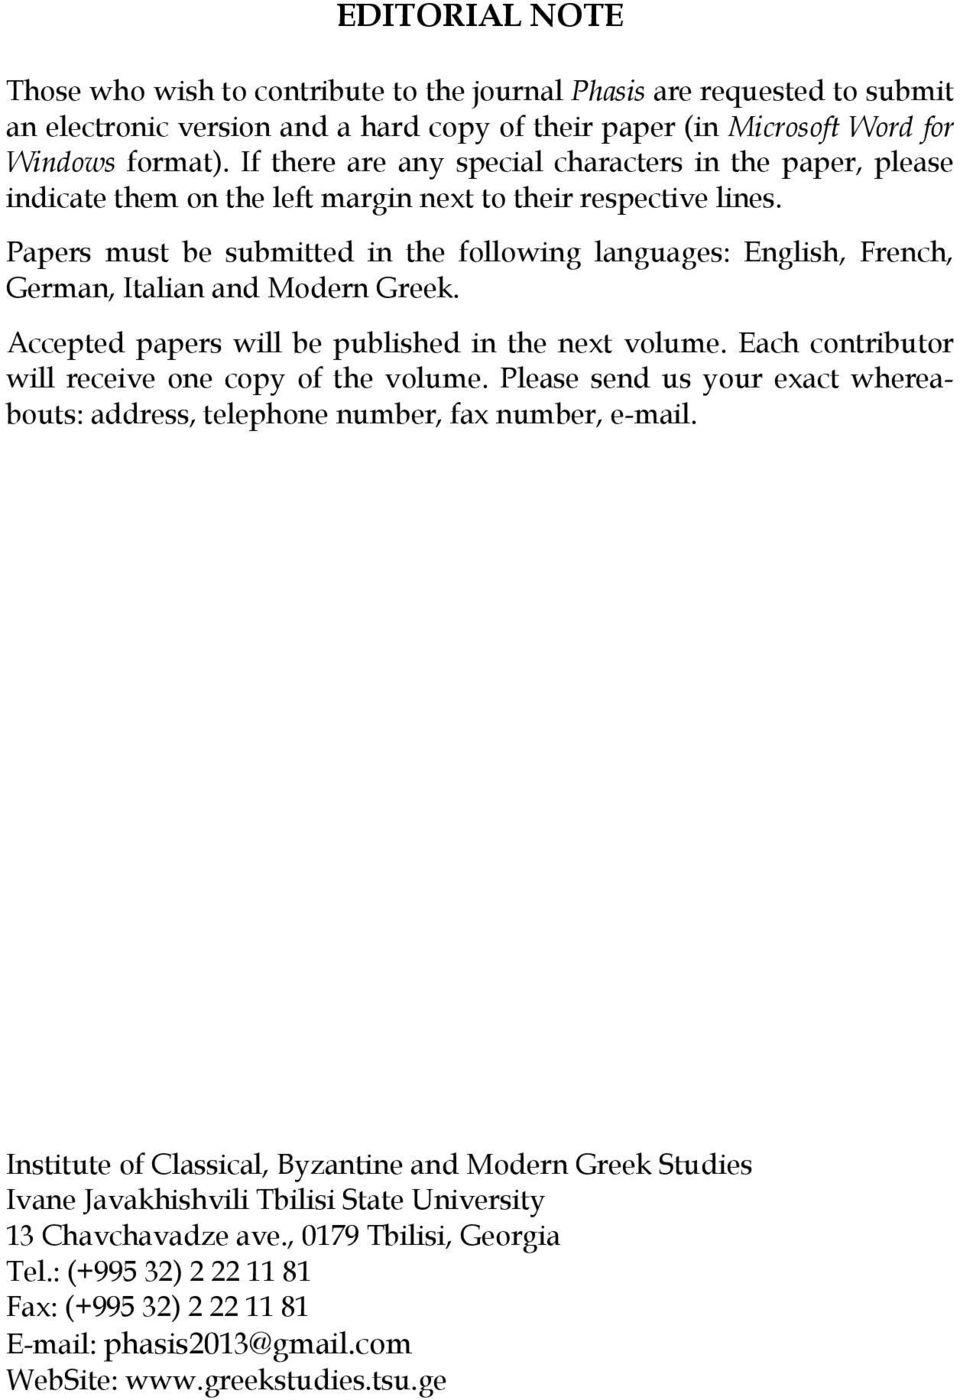 Papers must be submitted in the following languages: English, French, German, Italian and Modern Greek. Accepted papers will be published in the next volume.